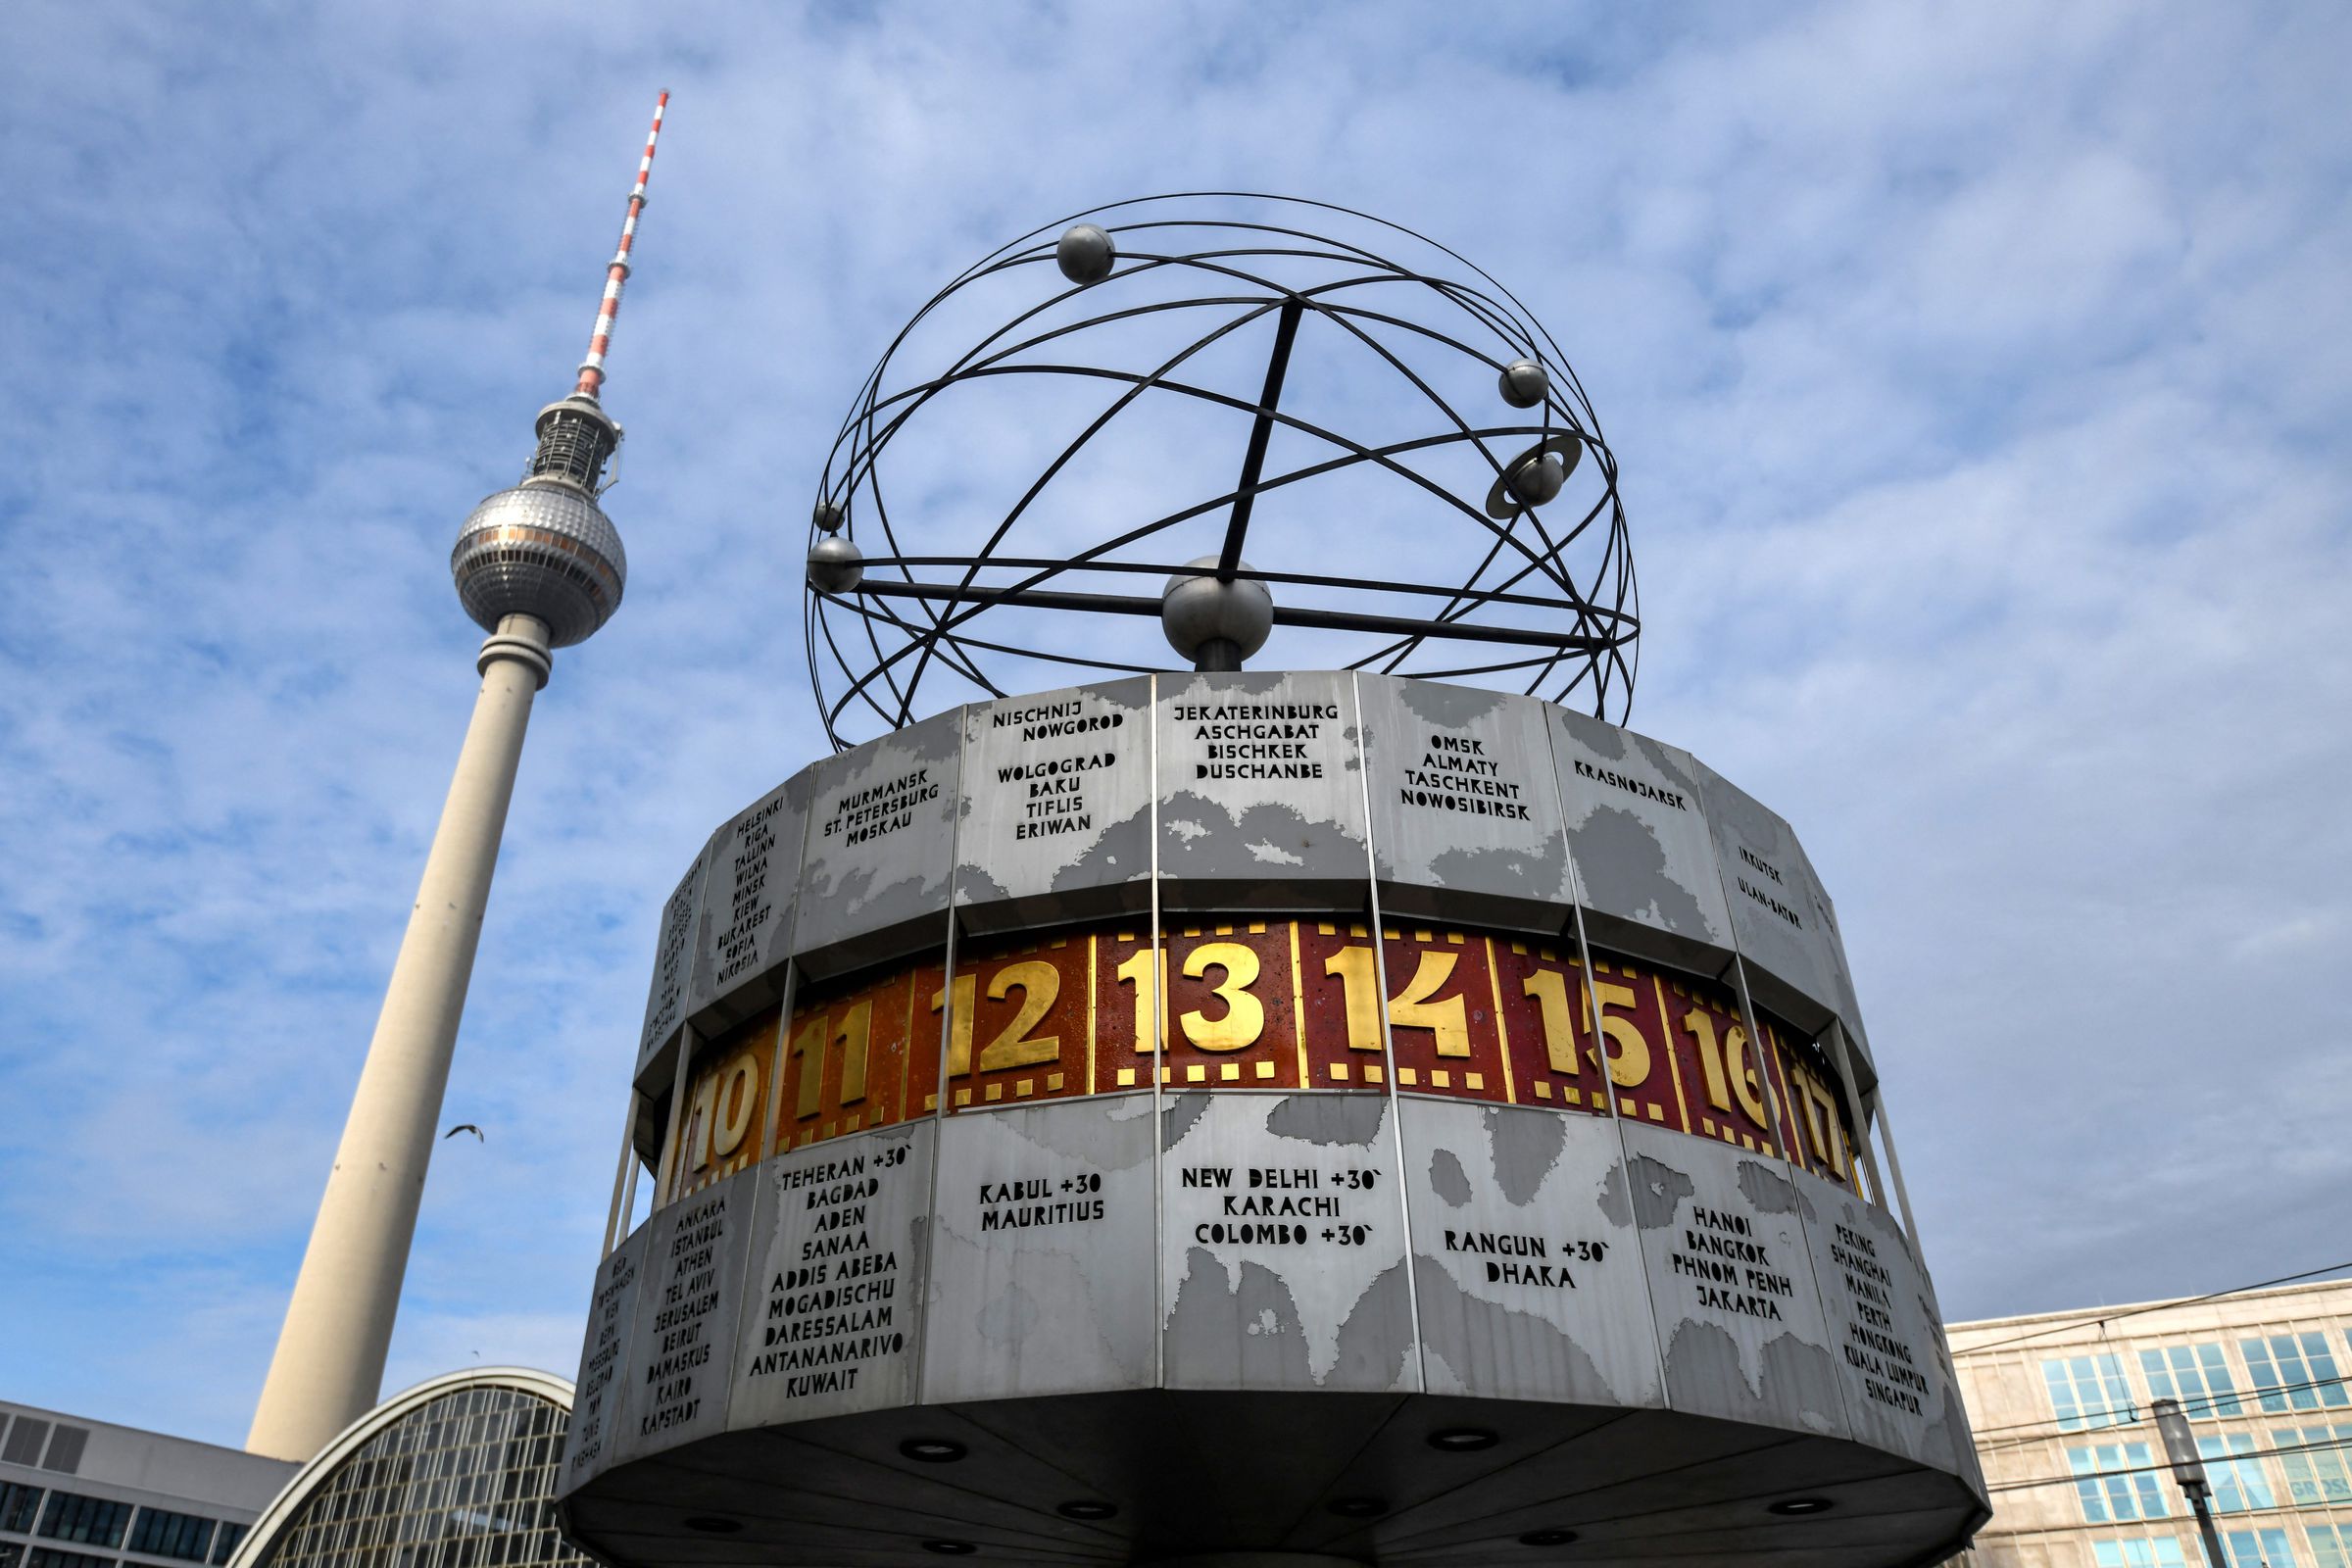 A photo taken on October 19th, 2021, shows the landmark Television Tower (Fernsehturm, L) and the World Time Clock (Weltzeituhr) in Berlin.